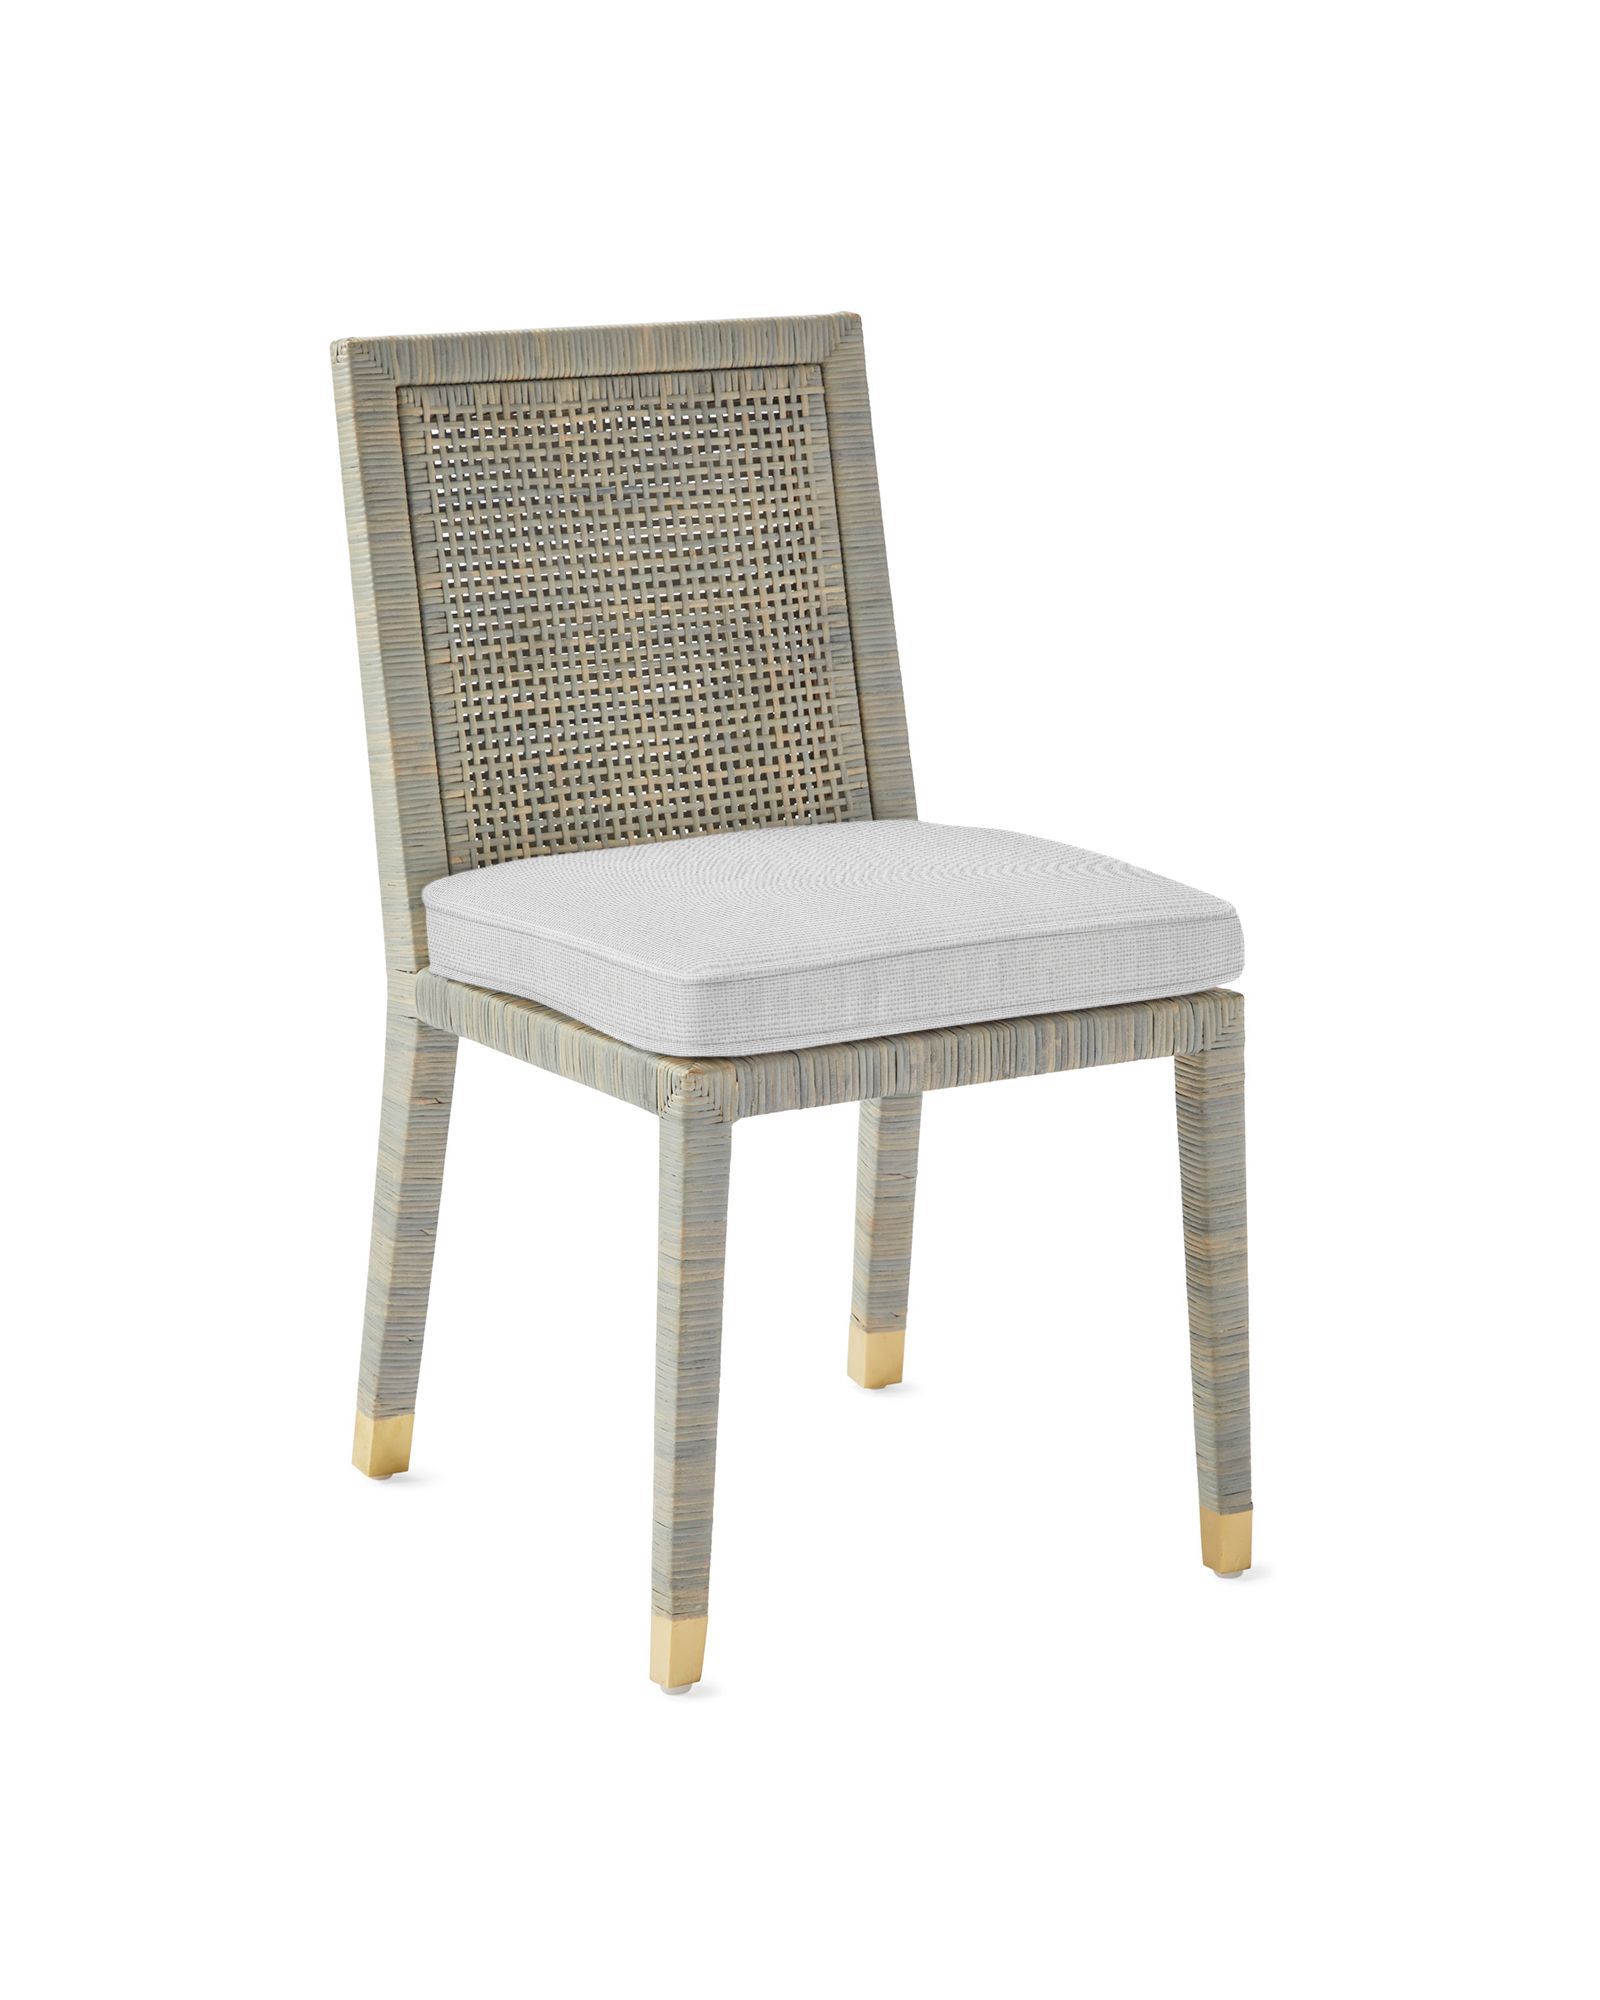 Balboa Rattan Side Chair - Mist | Serena and Lily